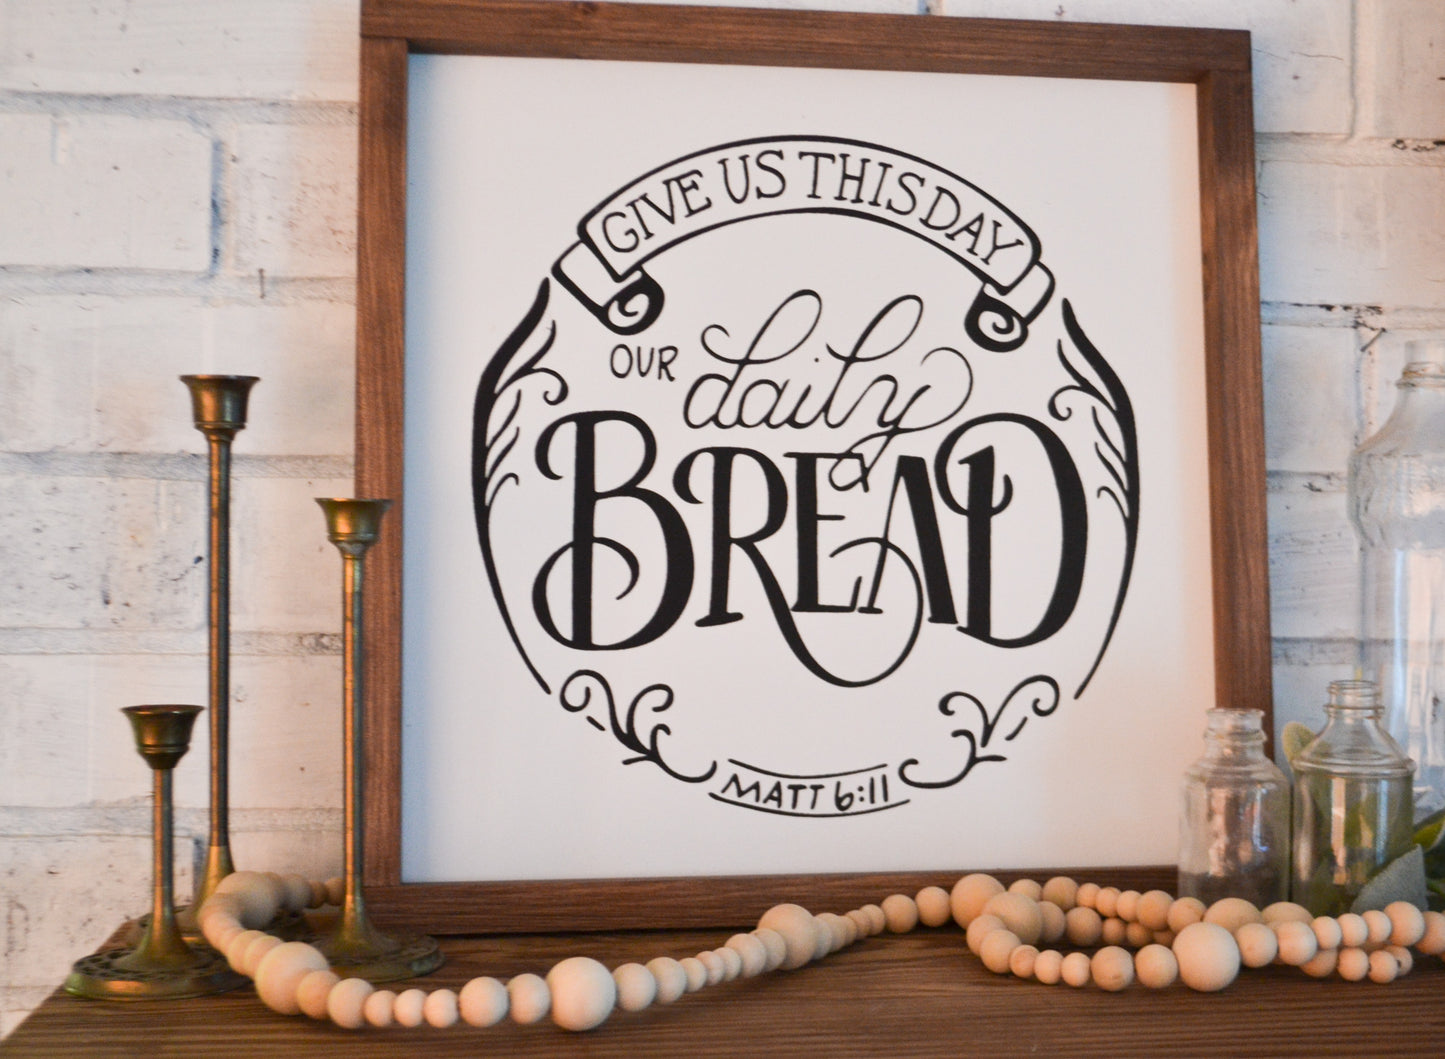 Give Us This Day Our Daily Bread Sign